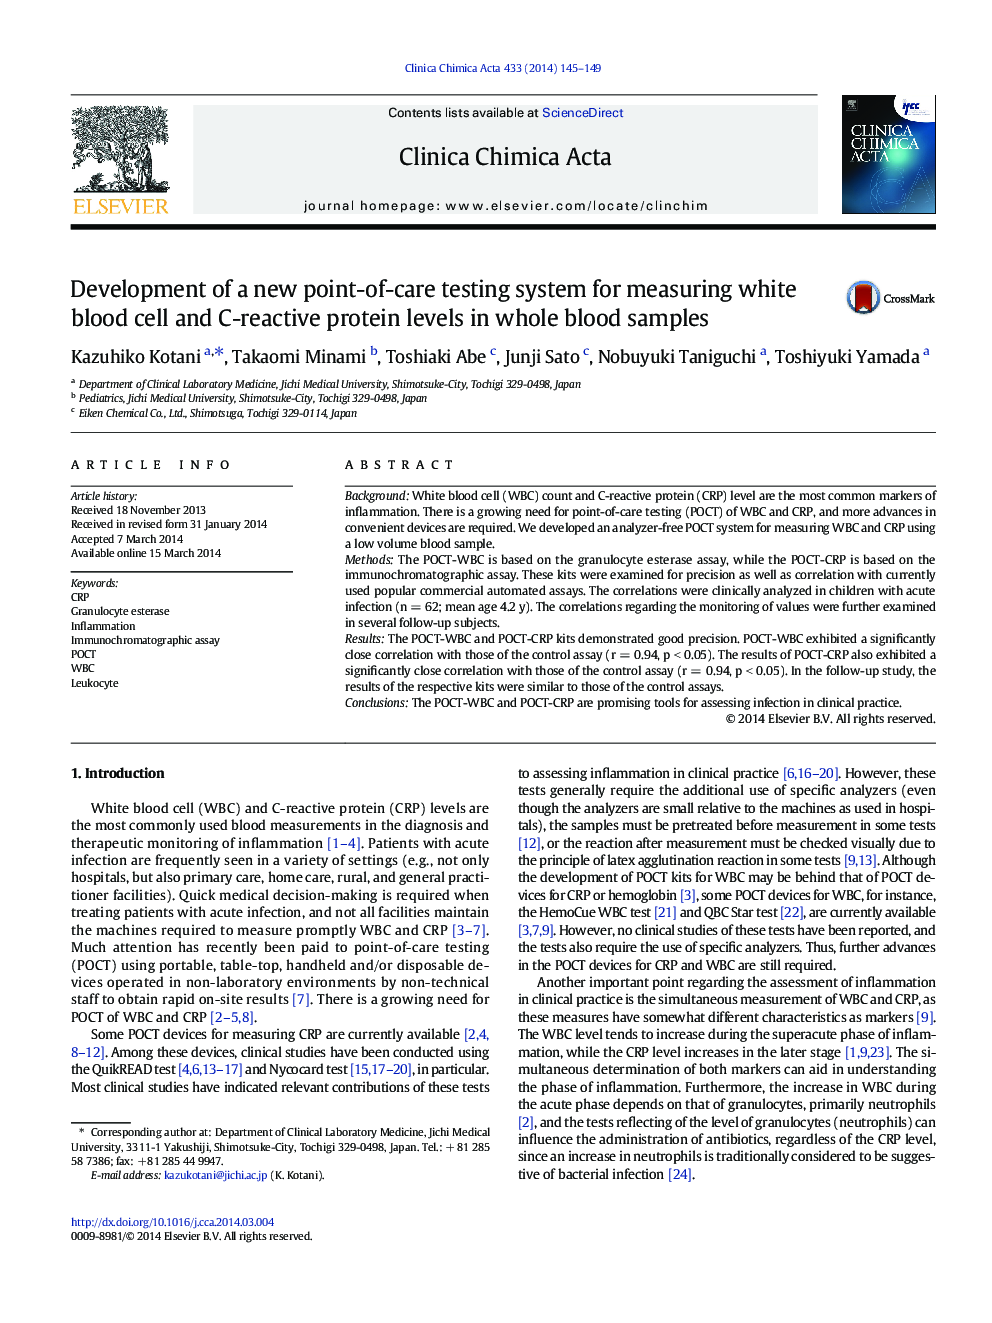 Development of a new point-of-care testing system for measuring white blood cell and C-reactive protein levels in whole blood samples